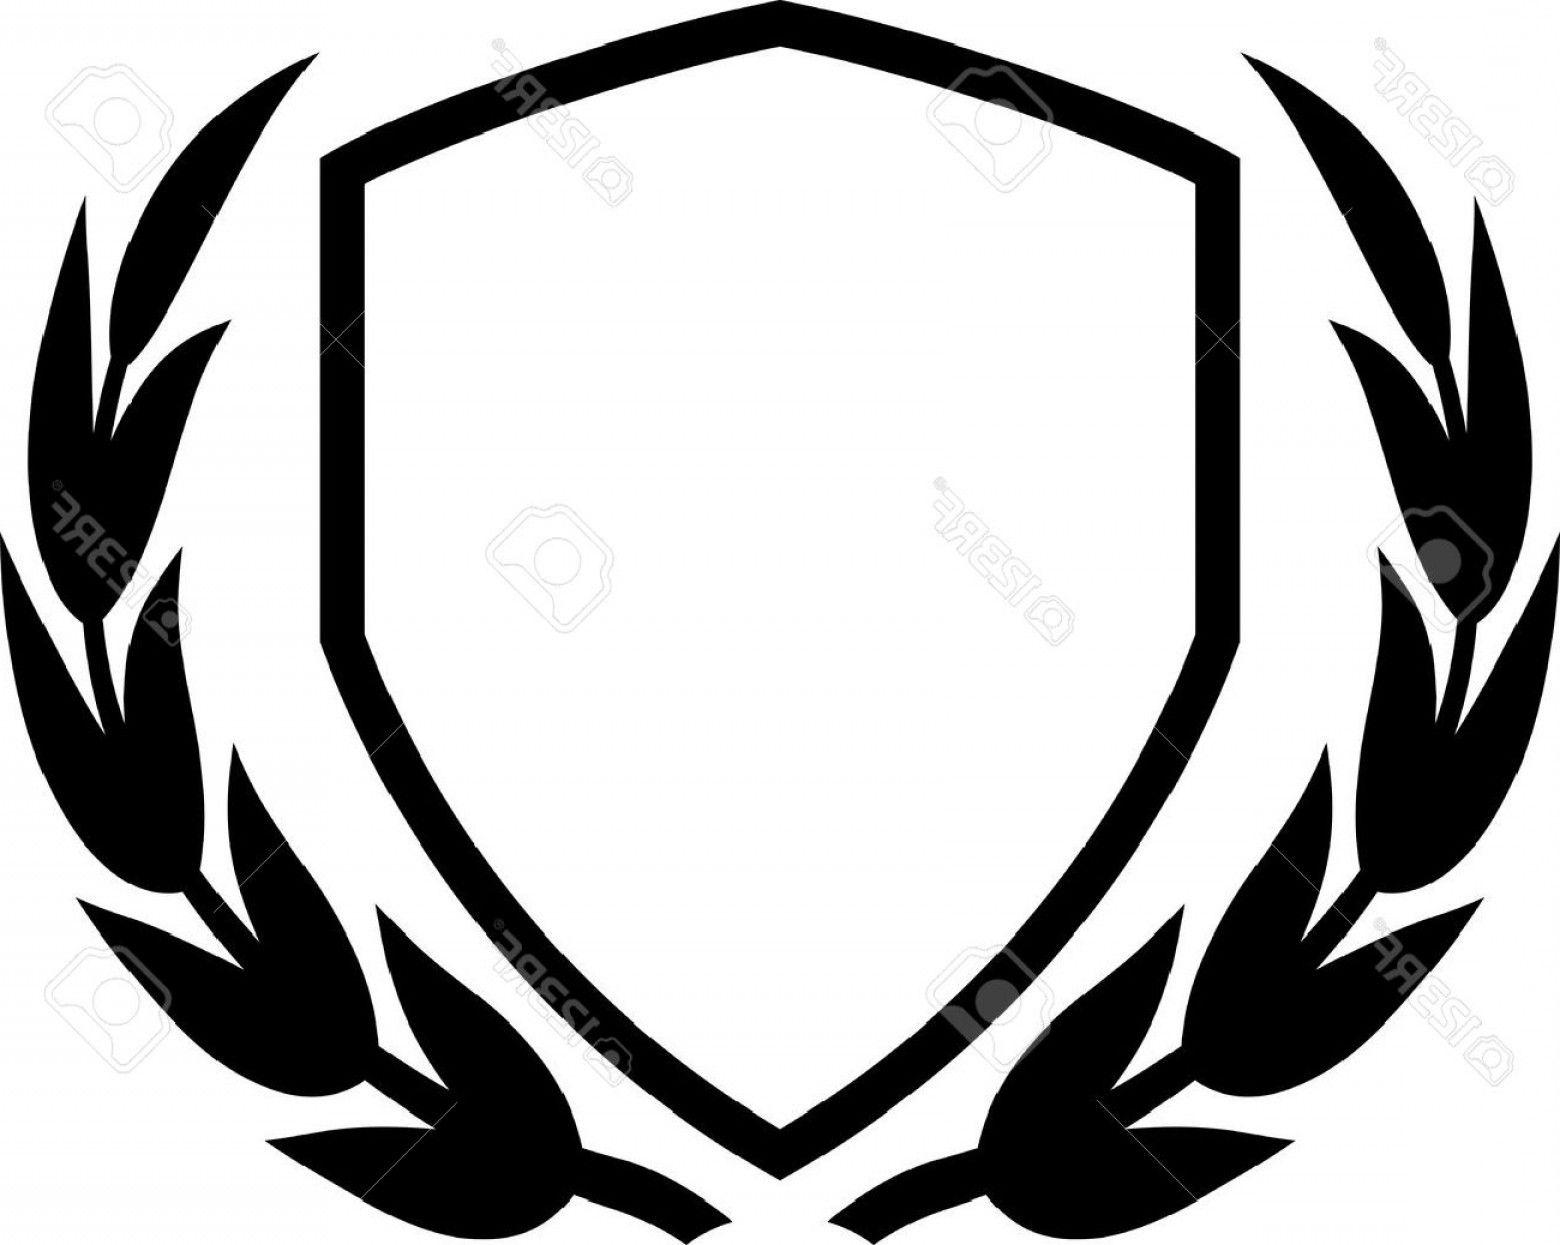 Black and White Shield Logo - Photovector Shield And Laurel Wreath Isolated On White | SHOPATCLOTH